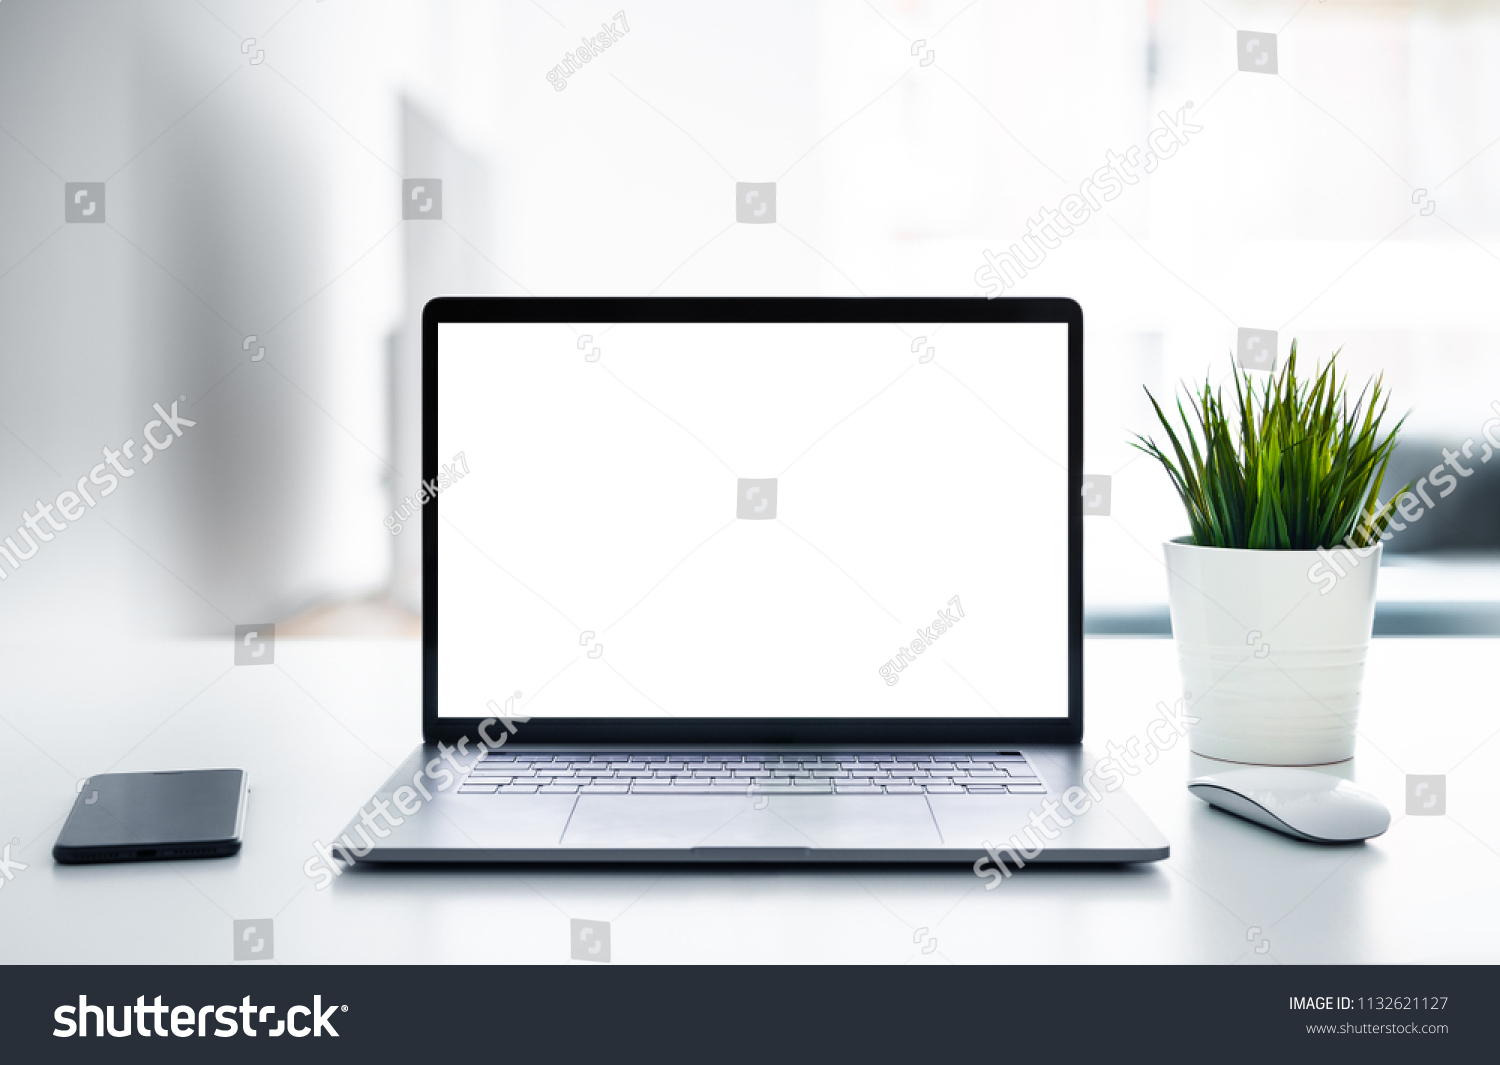 Laptop with blank screen on white table with mouse and smartphone. Home interior or office background #1132621127